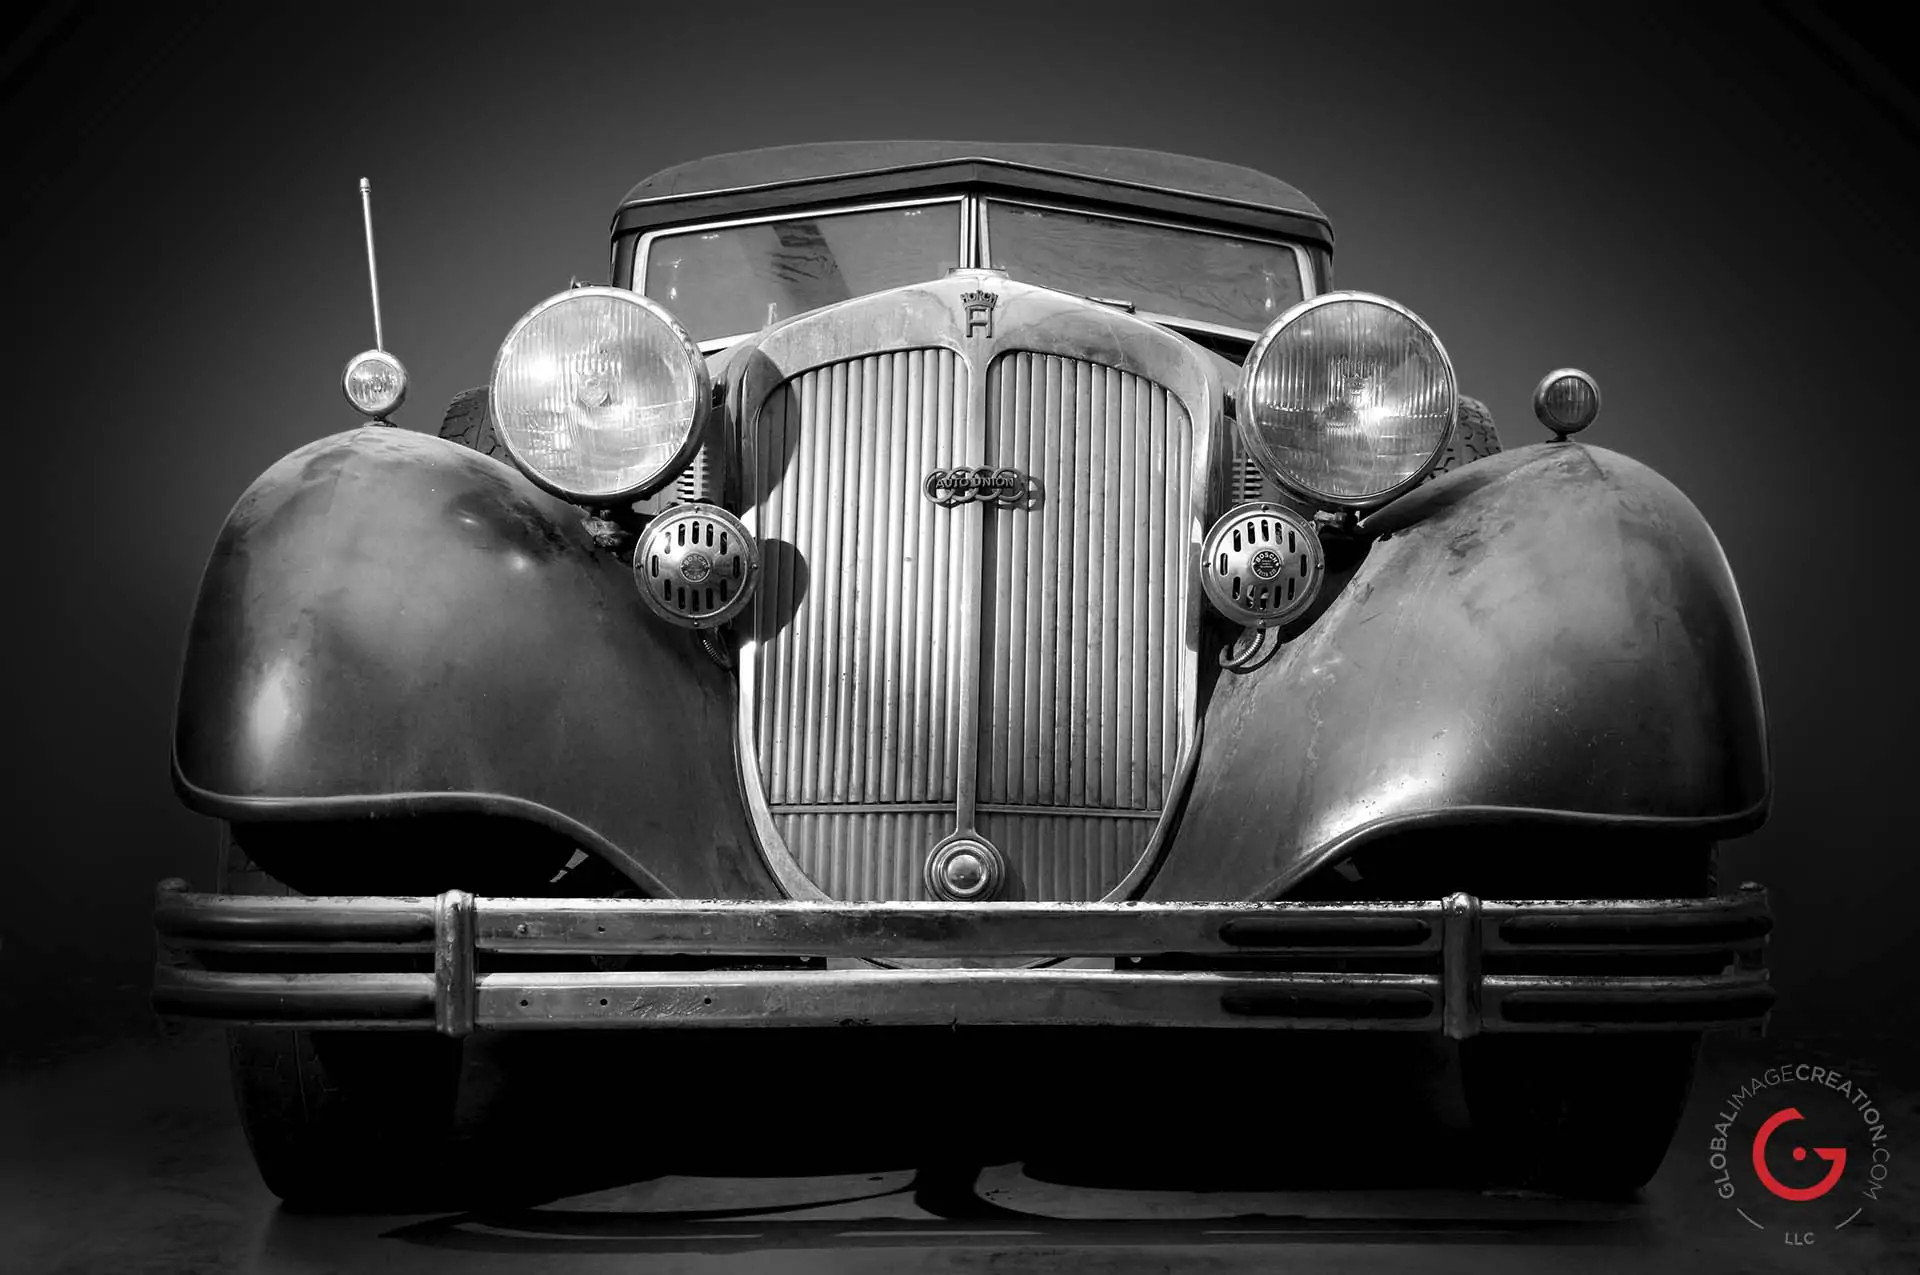 Front View - Horch Barn Find, Branson Classic Car Auction - Professional Car Photographer, Automotive Photography